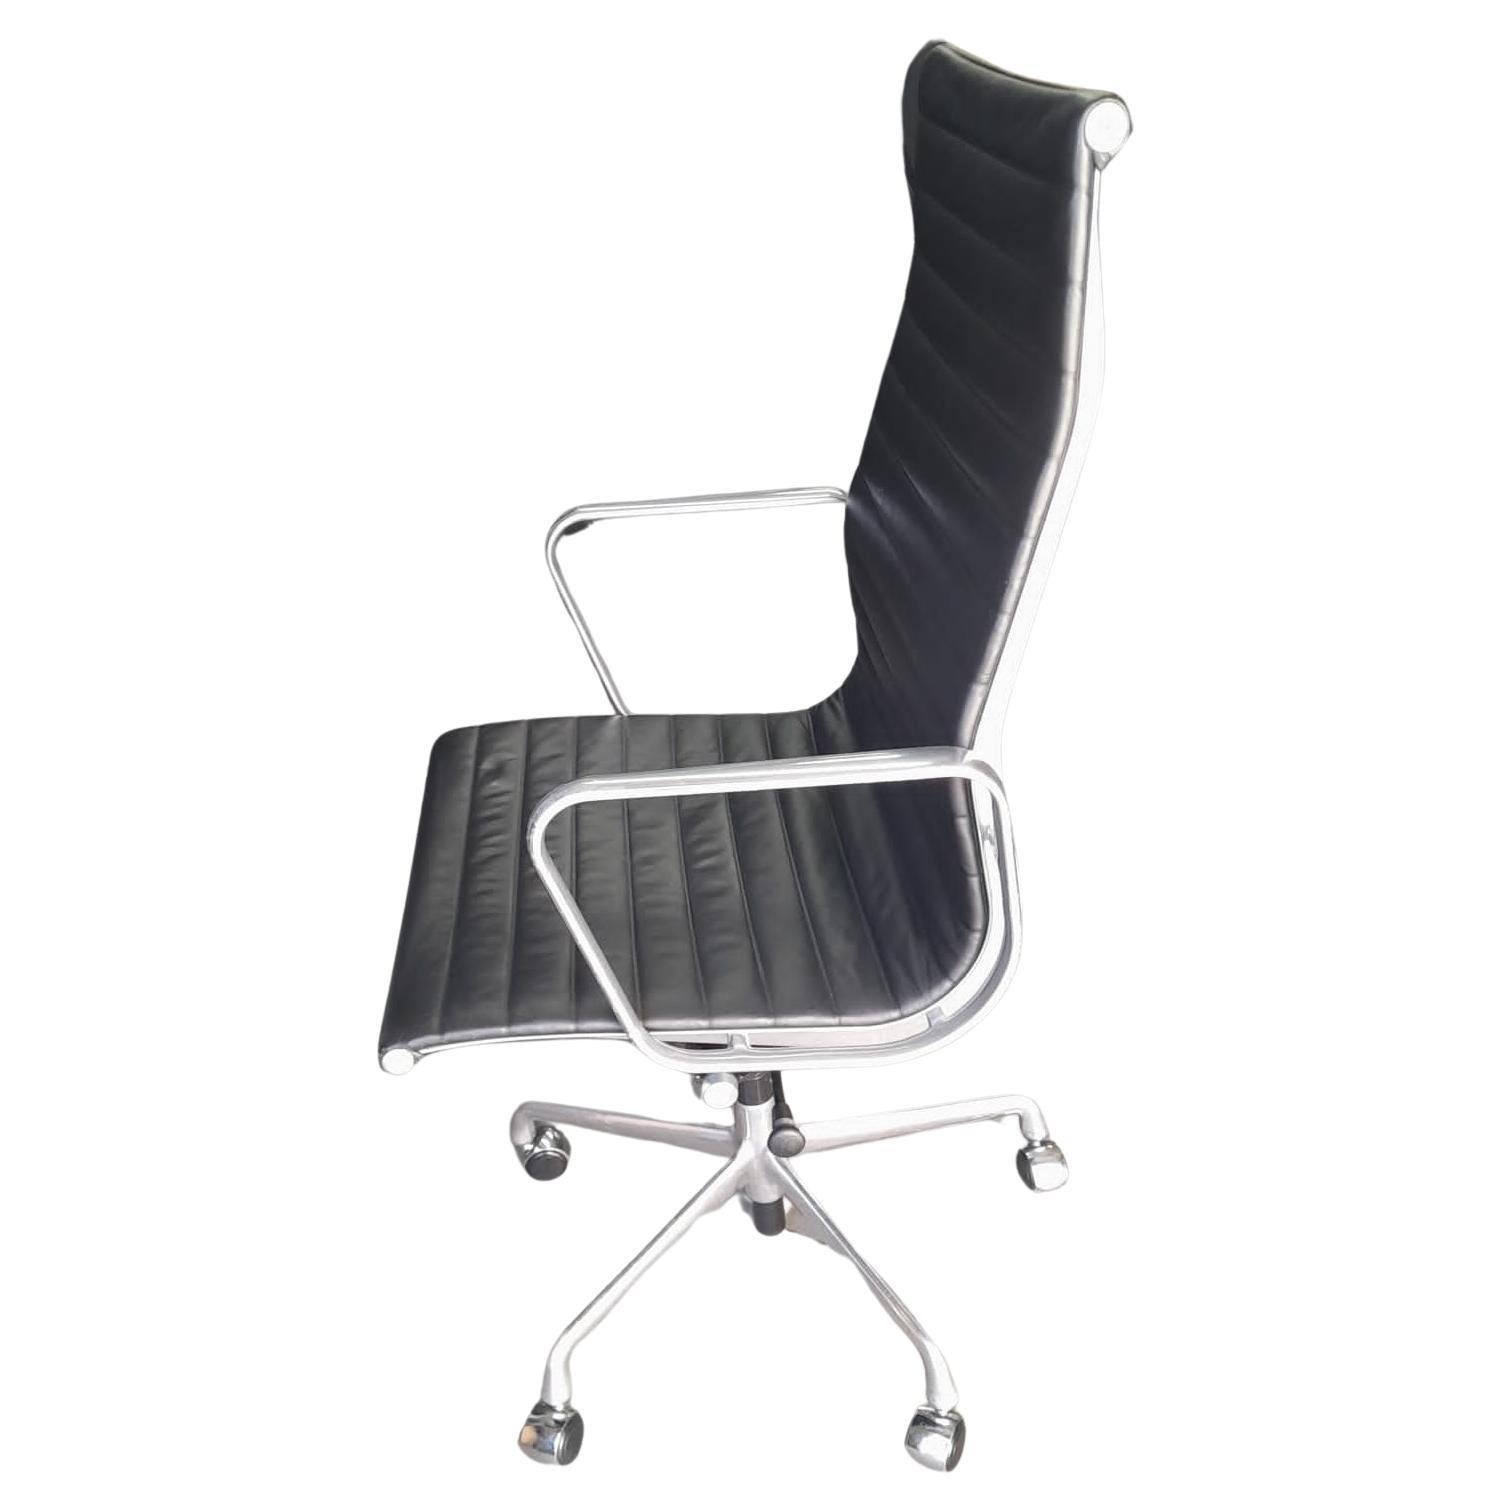 Ask for custom shipping quote

An icon of Mid-Century Modern design that continues to be produced today. Pneumatic height and tilt. Premium black leather that is thicker and softer than other aluminum group chairs and aluminum group soft pad